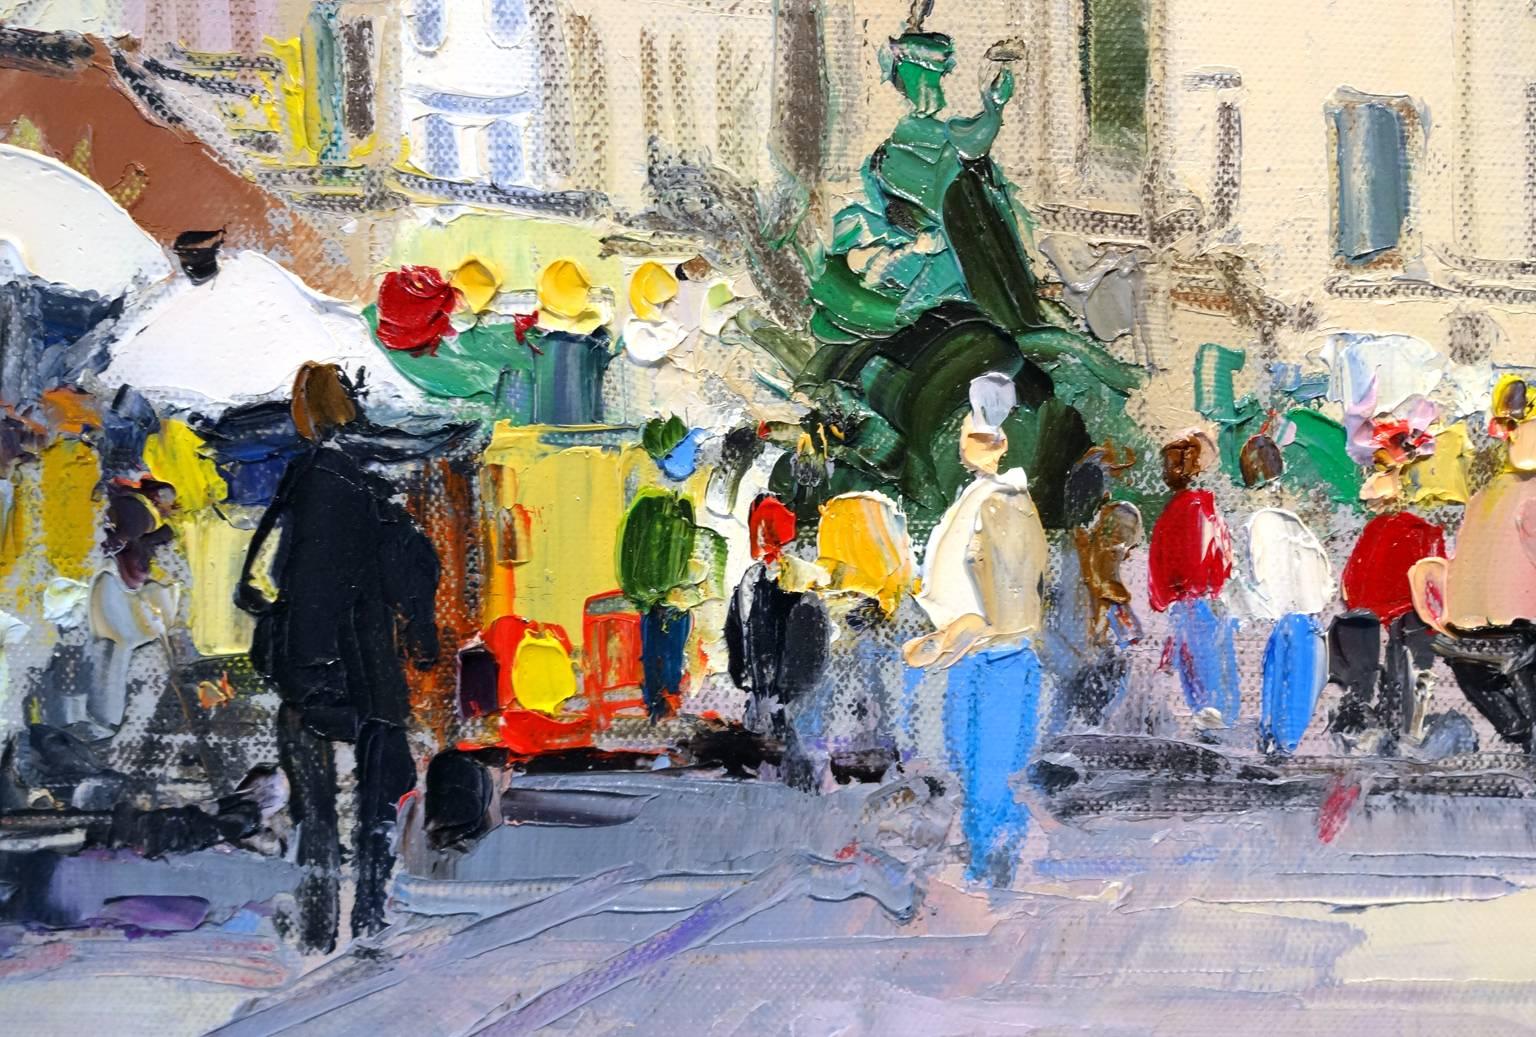 This lively scene along the Riva Degli Schiavoni in Venice is painted by French artist, Richard de Premare. The street to the left of the canal is bustling with people, cafes and brightly colored umbrellas. His impressionist style lends itself well